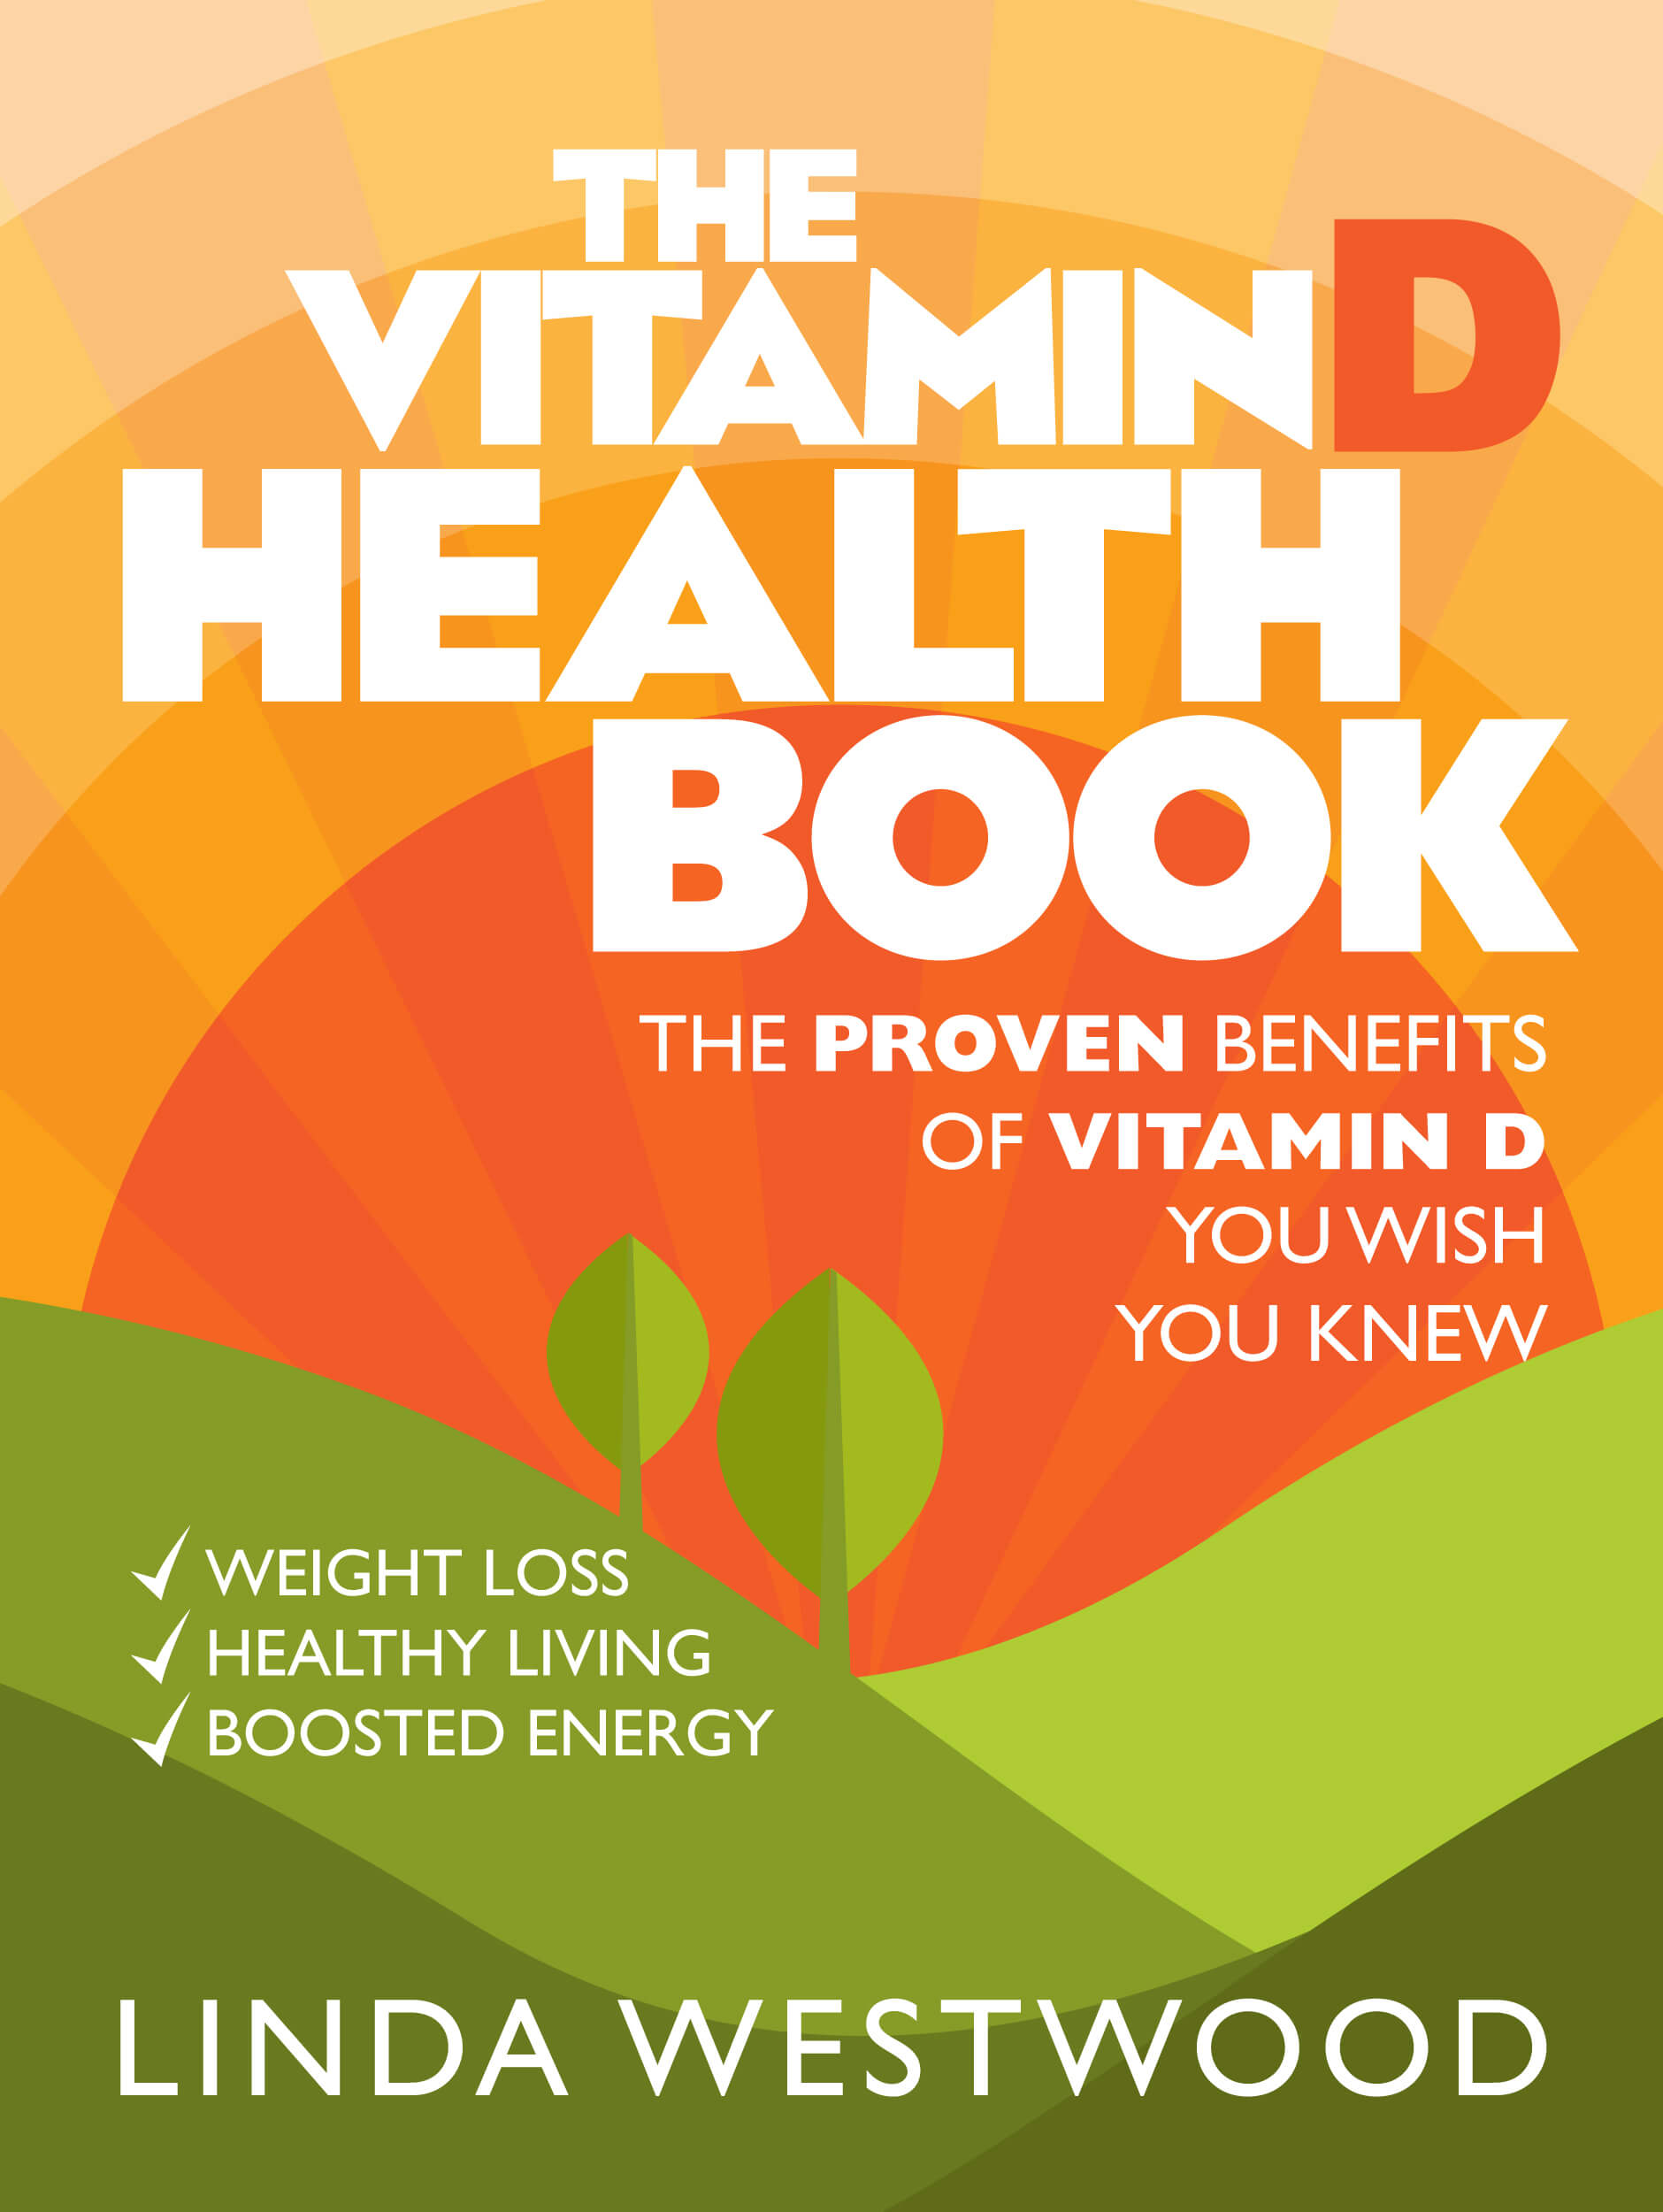 FREE: The Vitamin D Health Book (3rd Edition): The PROVEN Benefits of Vitamin D YOU WISH YOU KNEW for Weight Loss, Healthy Living & Boosted Energy! by Linda Westwood